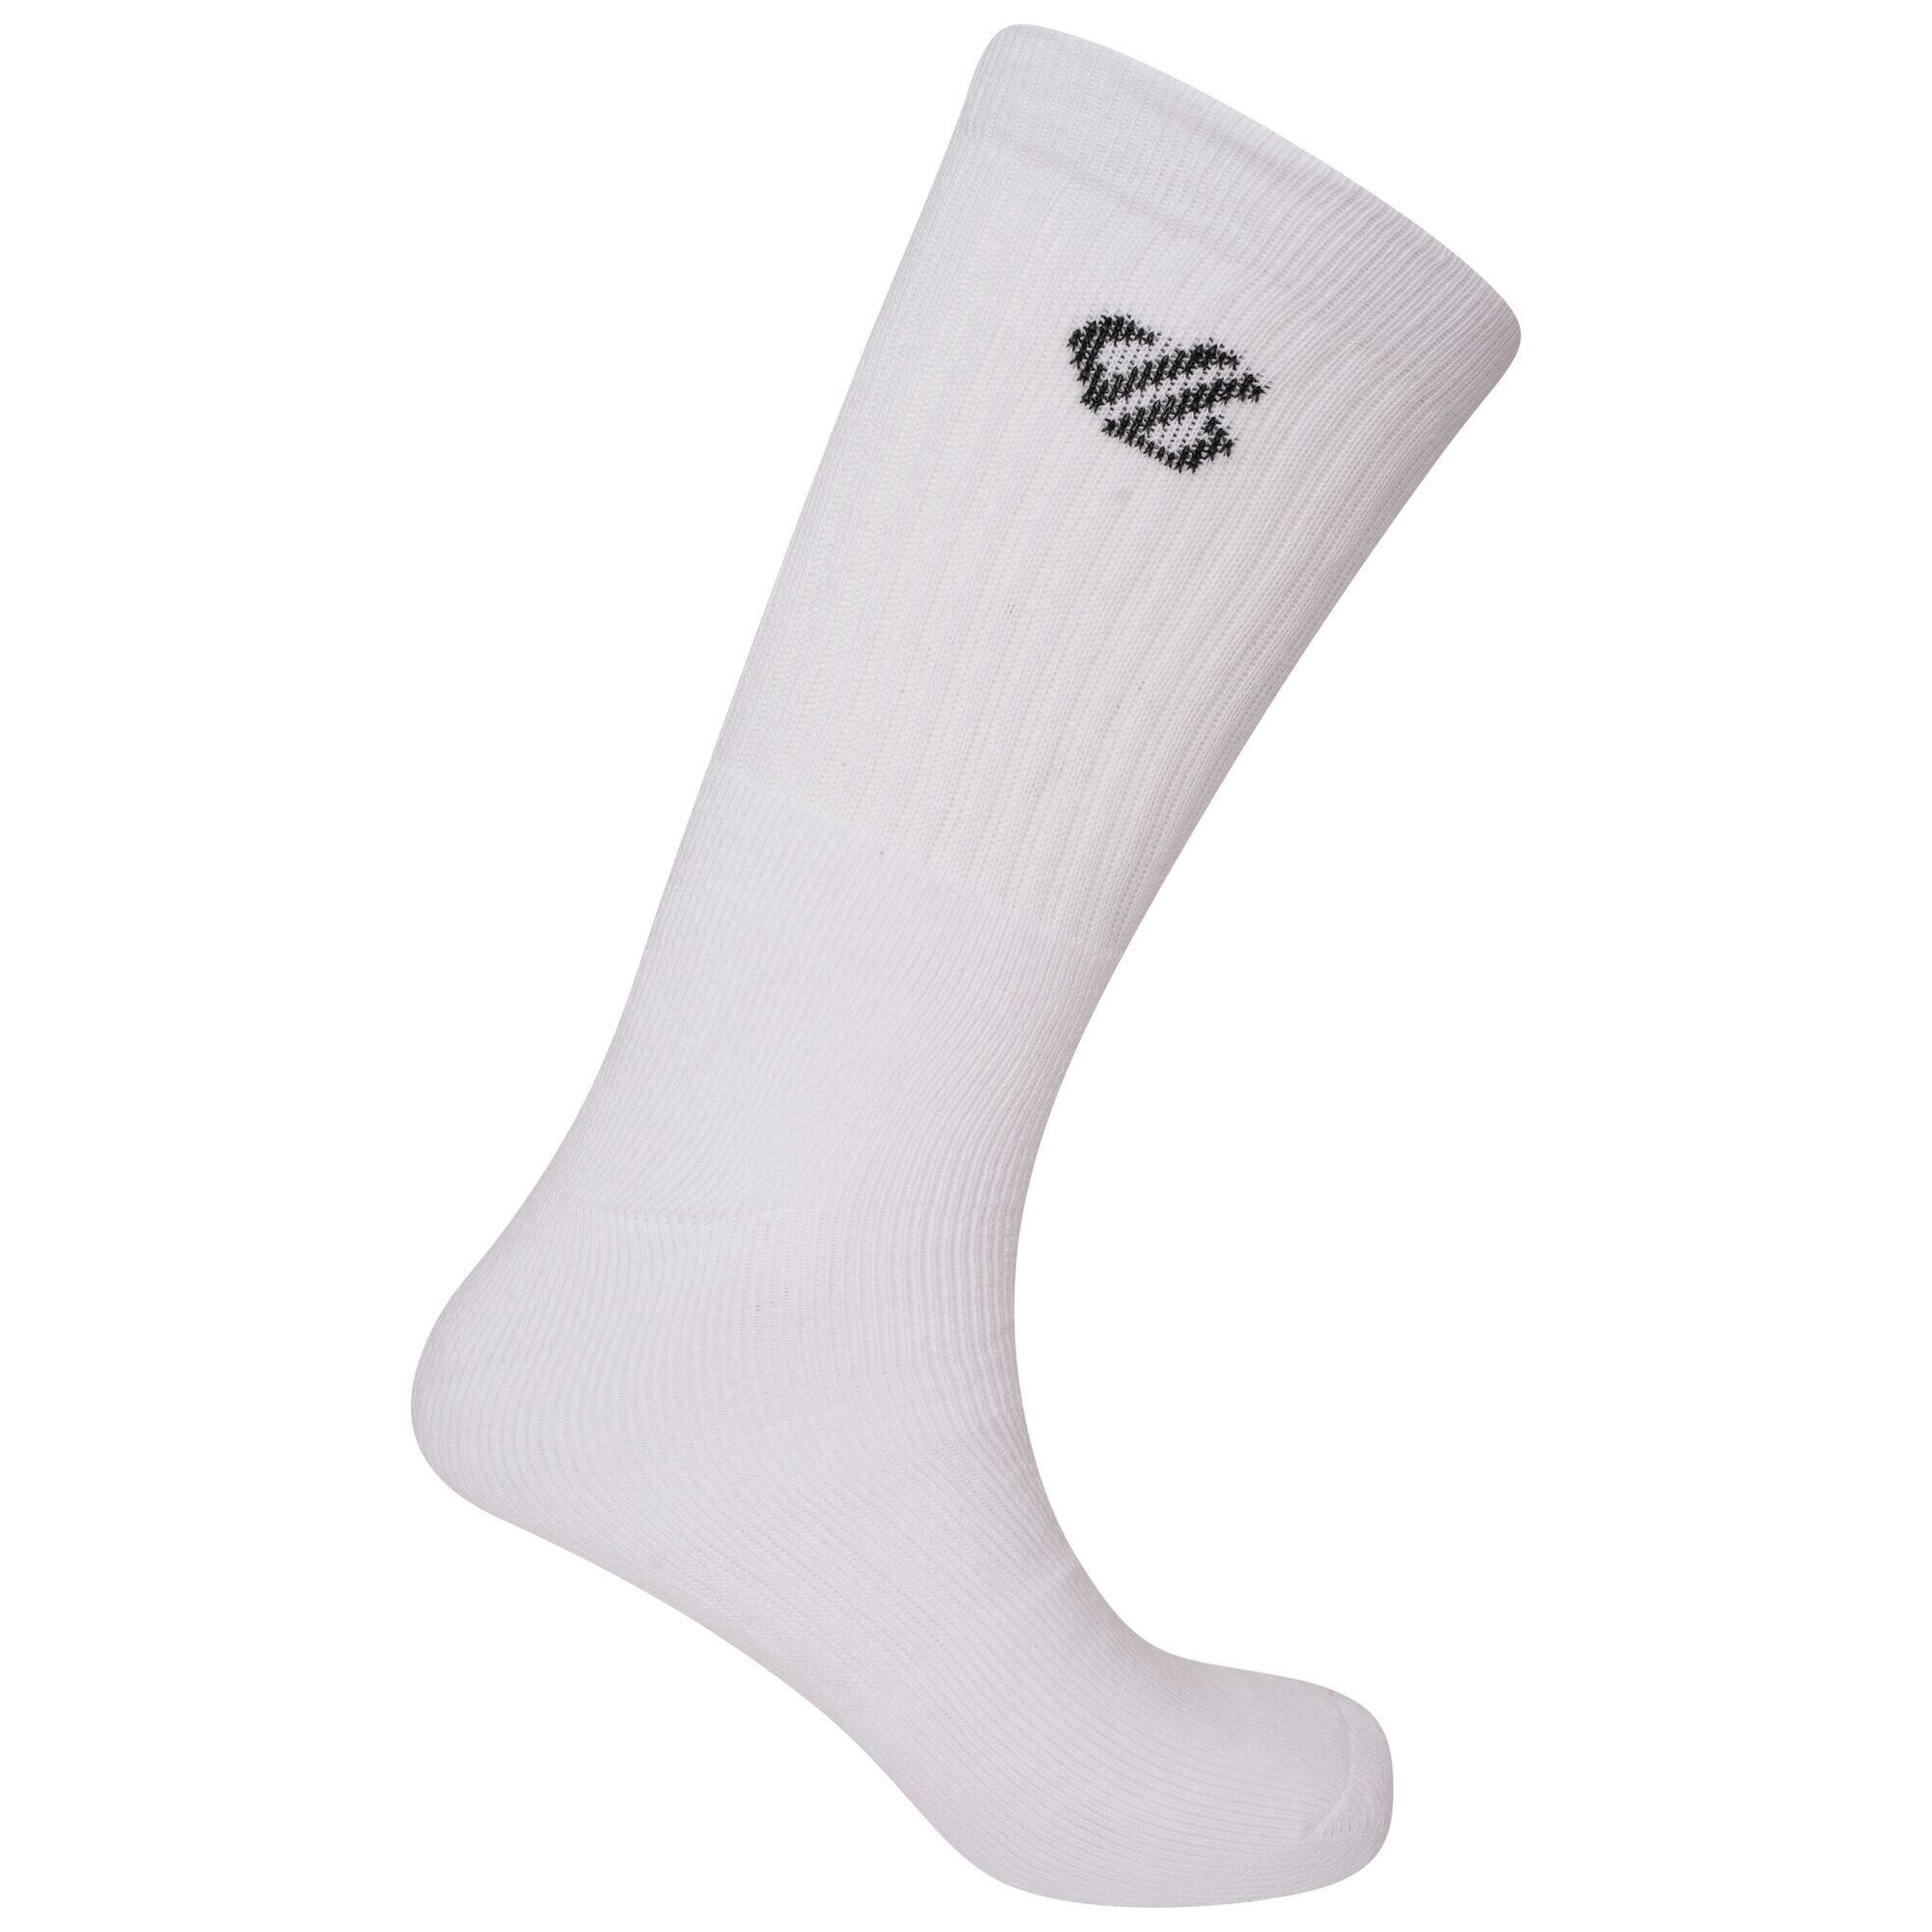 DARE 2B Unisex Adult Essentials Sports Ankle Socks (Pack of 3) (White)